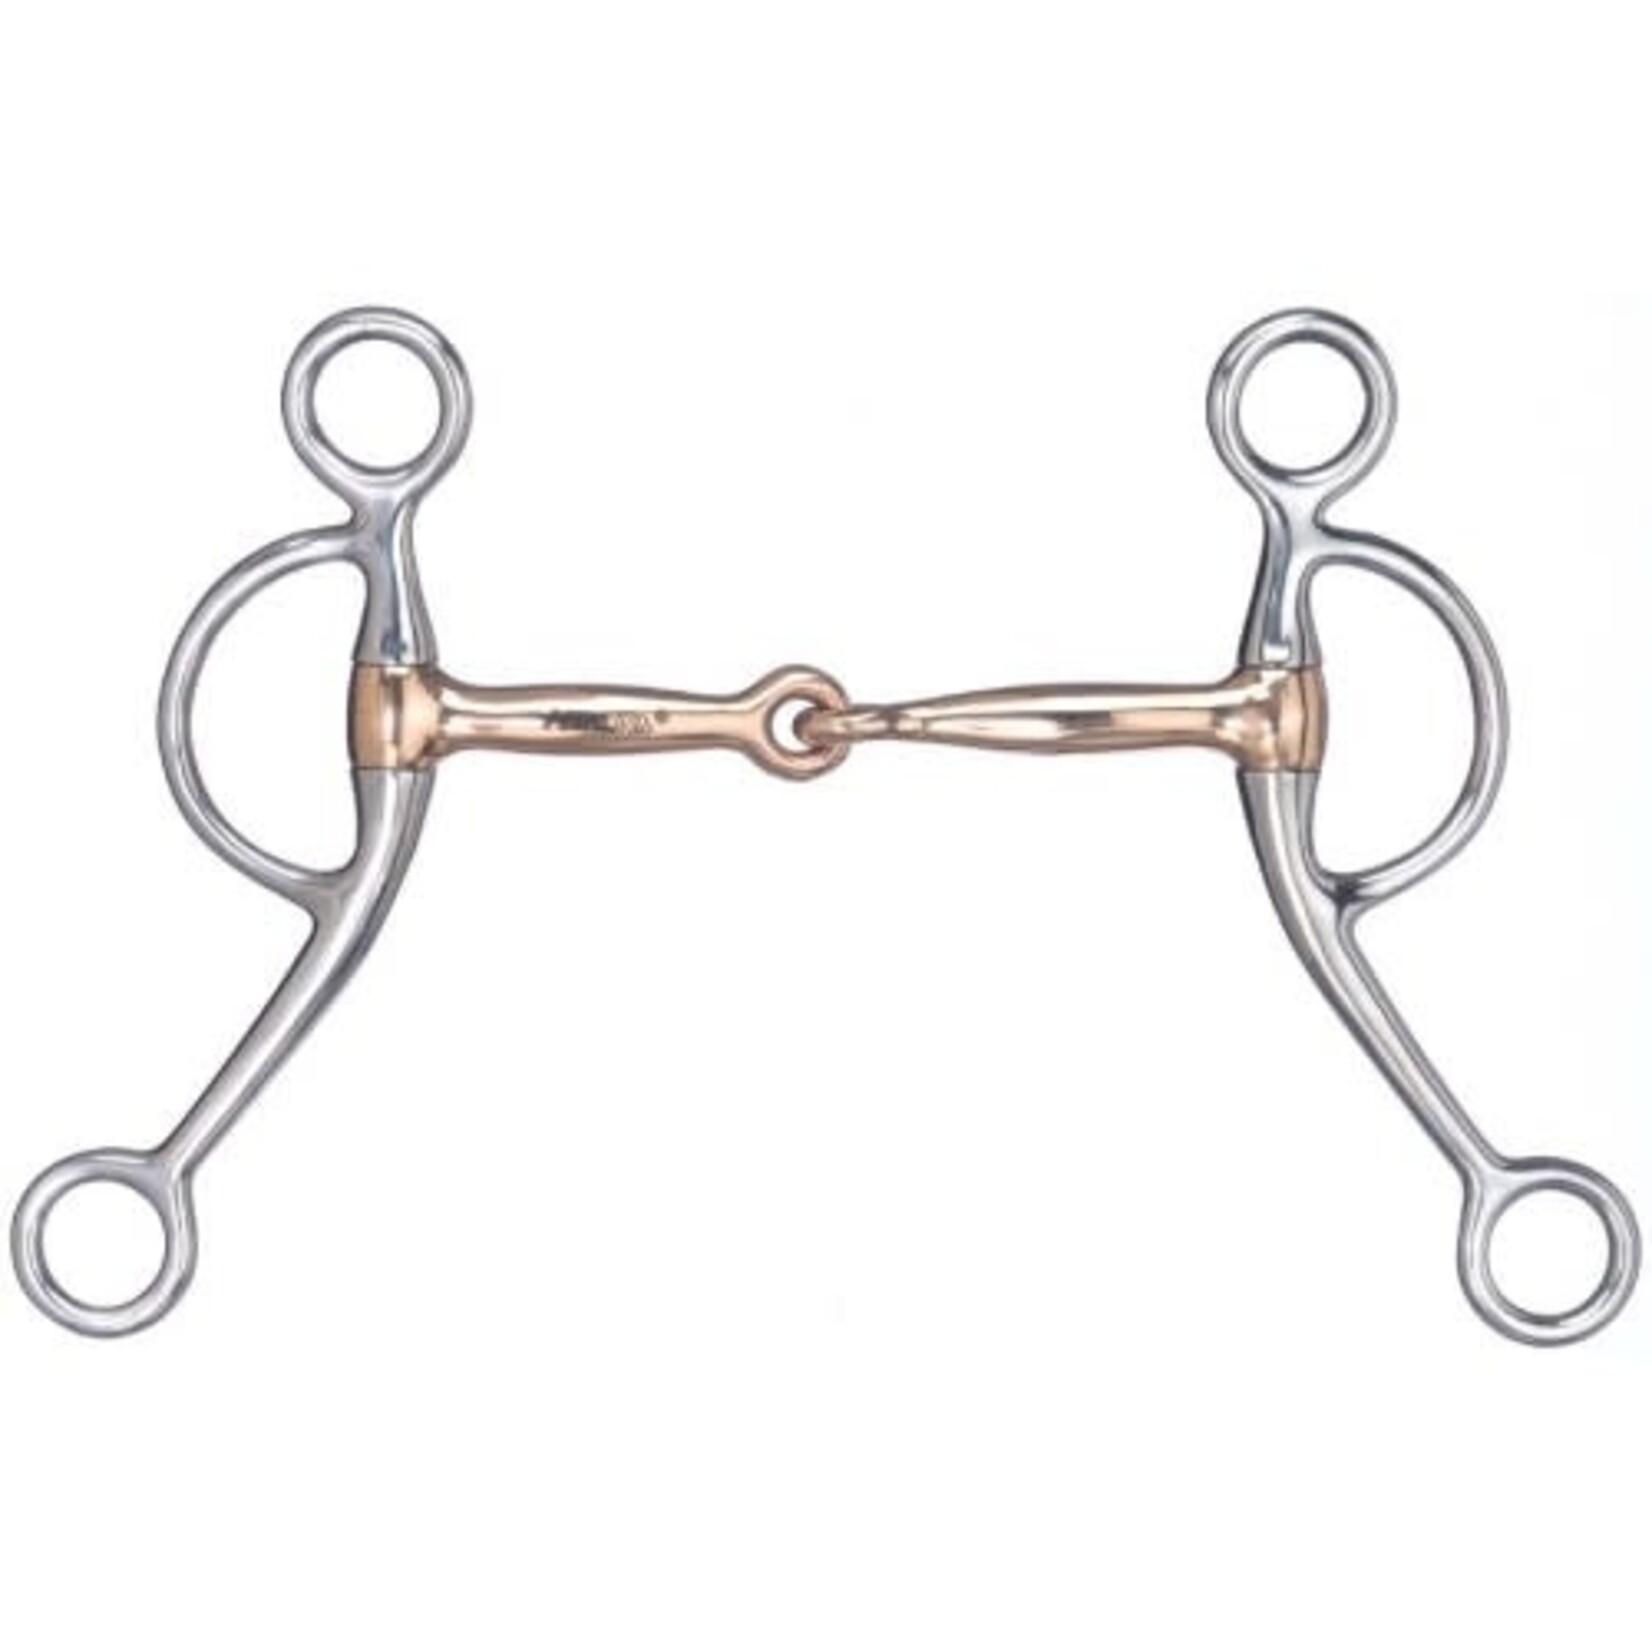 Metalab Metalab Stainless Steel Copper Mouth Snaffle